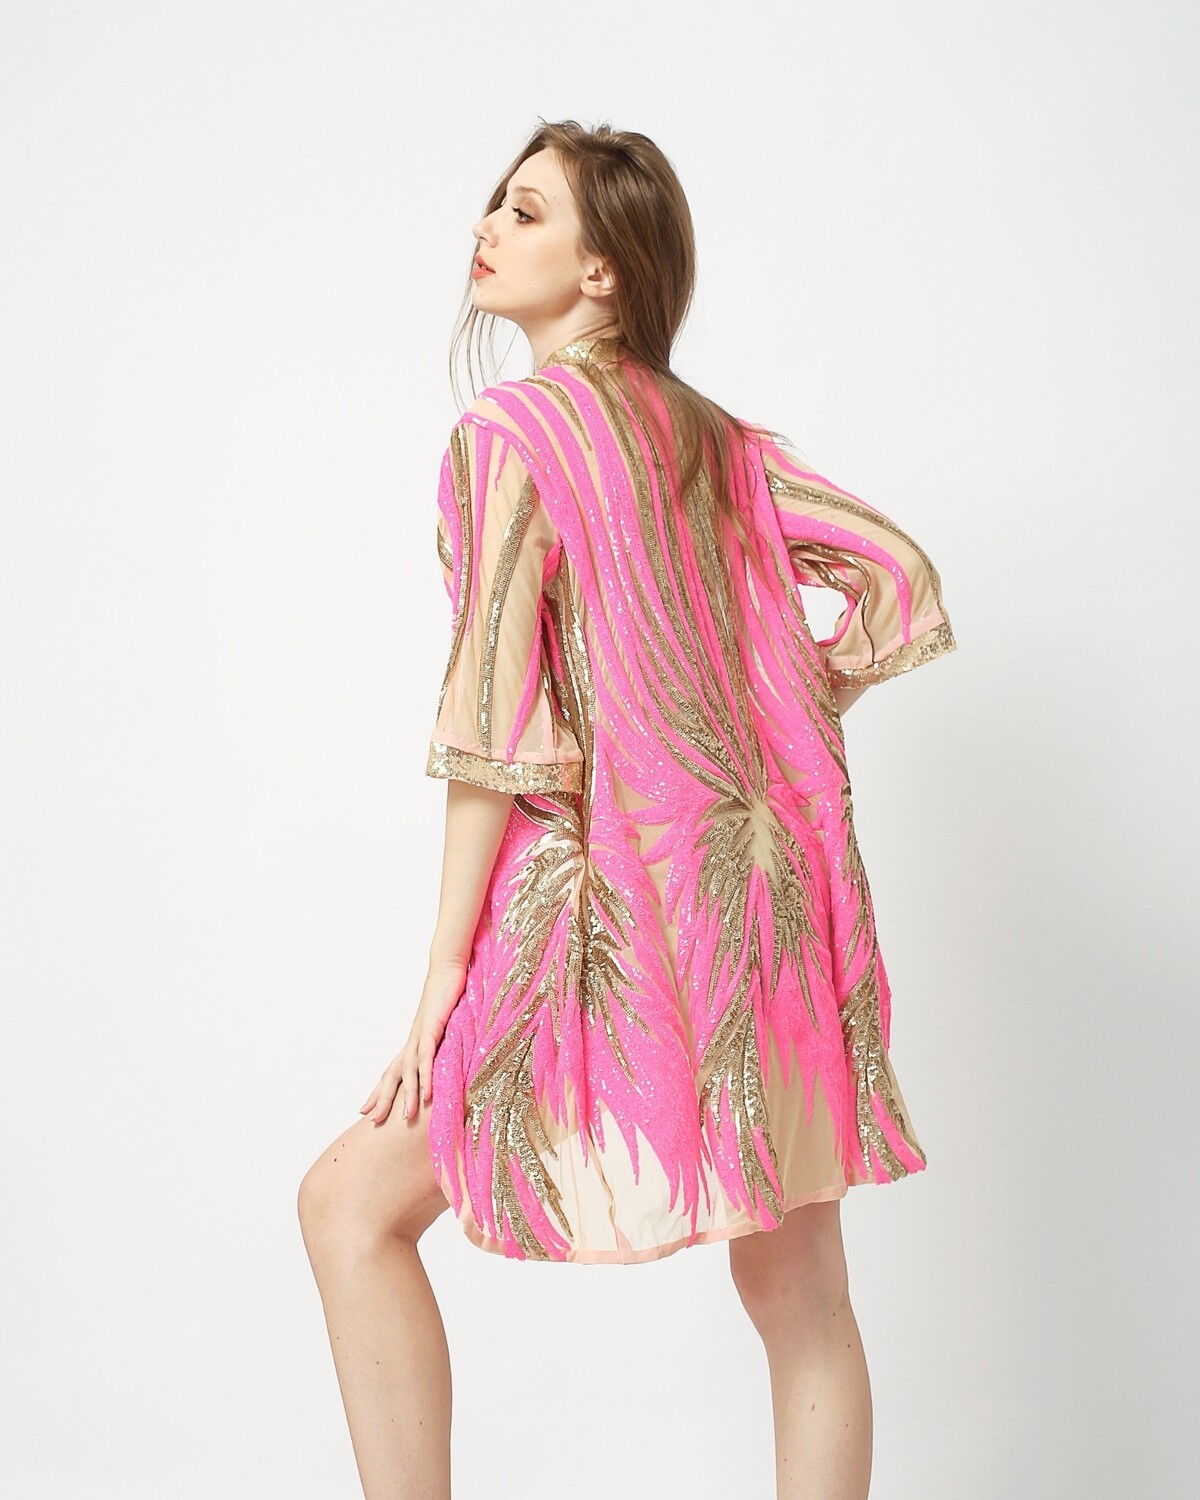 Pink Sequin Kimono - Burning Man Party Festival Outfit